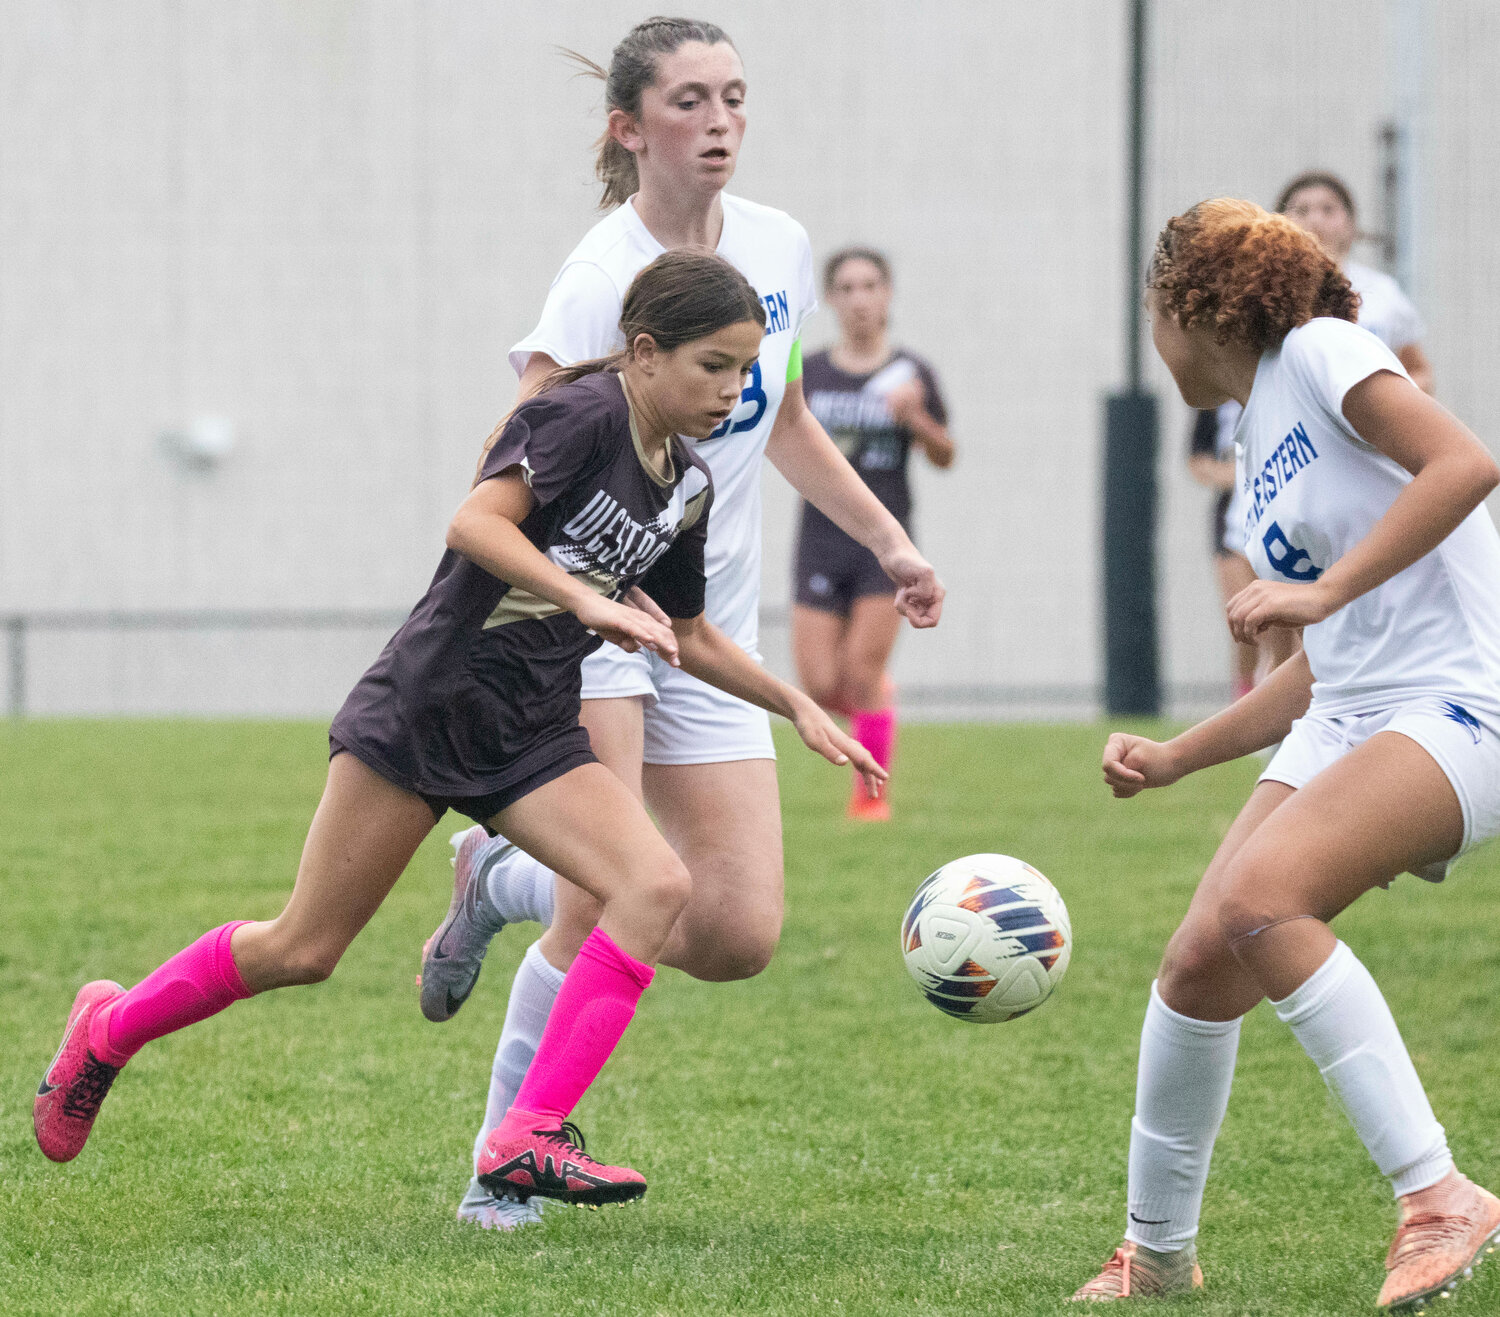 Lily Veracka dribbles through a pair defenders before scoring a goal to give Westport a 1-0 lead in the second half of the Wildcats' win over Southeastern on Wednesday.